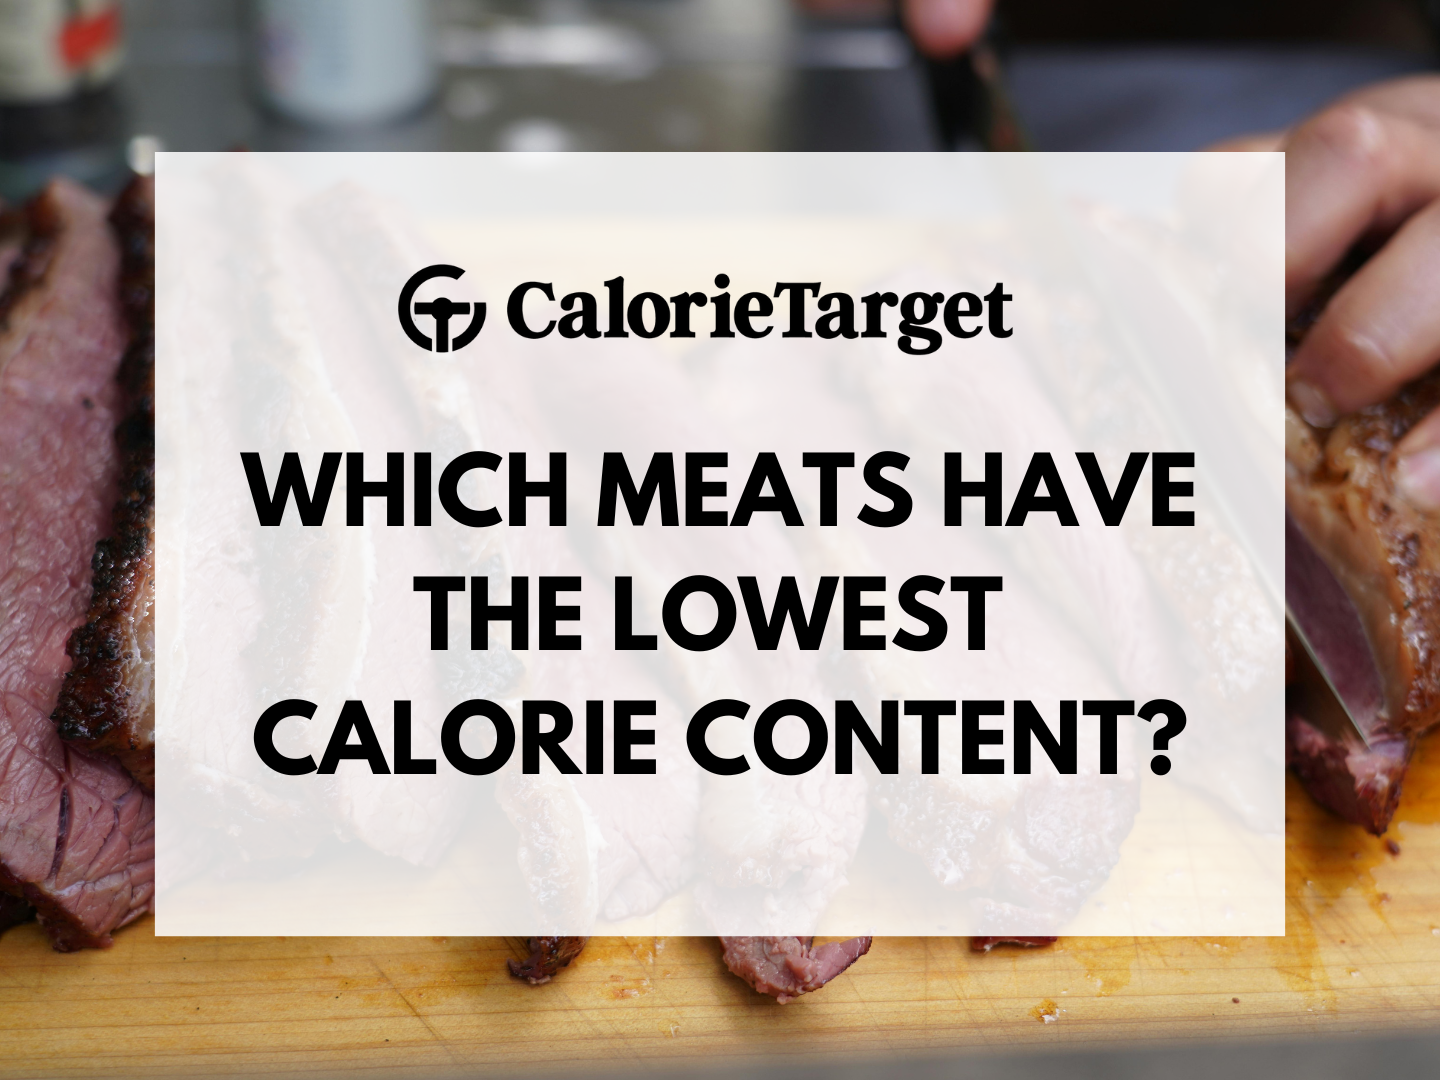 Which meats have the lowest calorie content